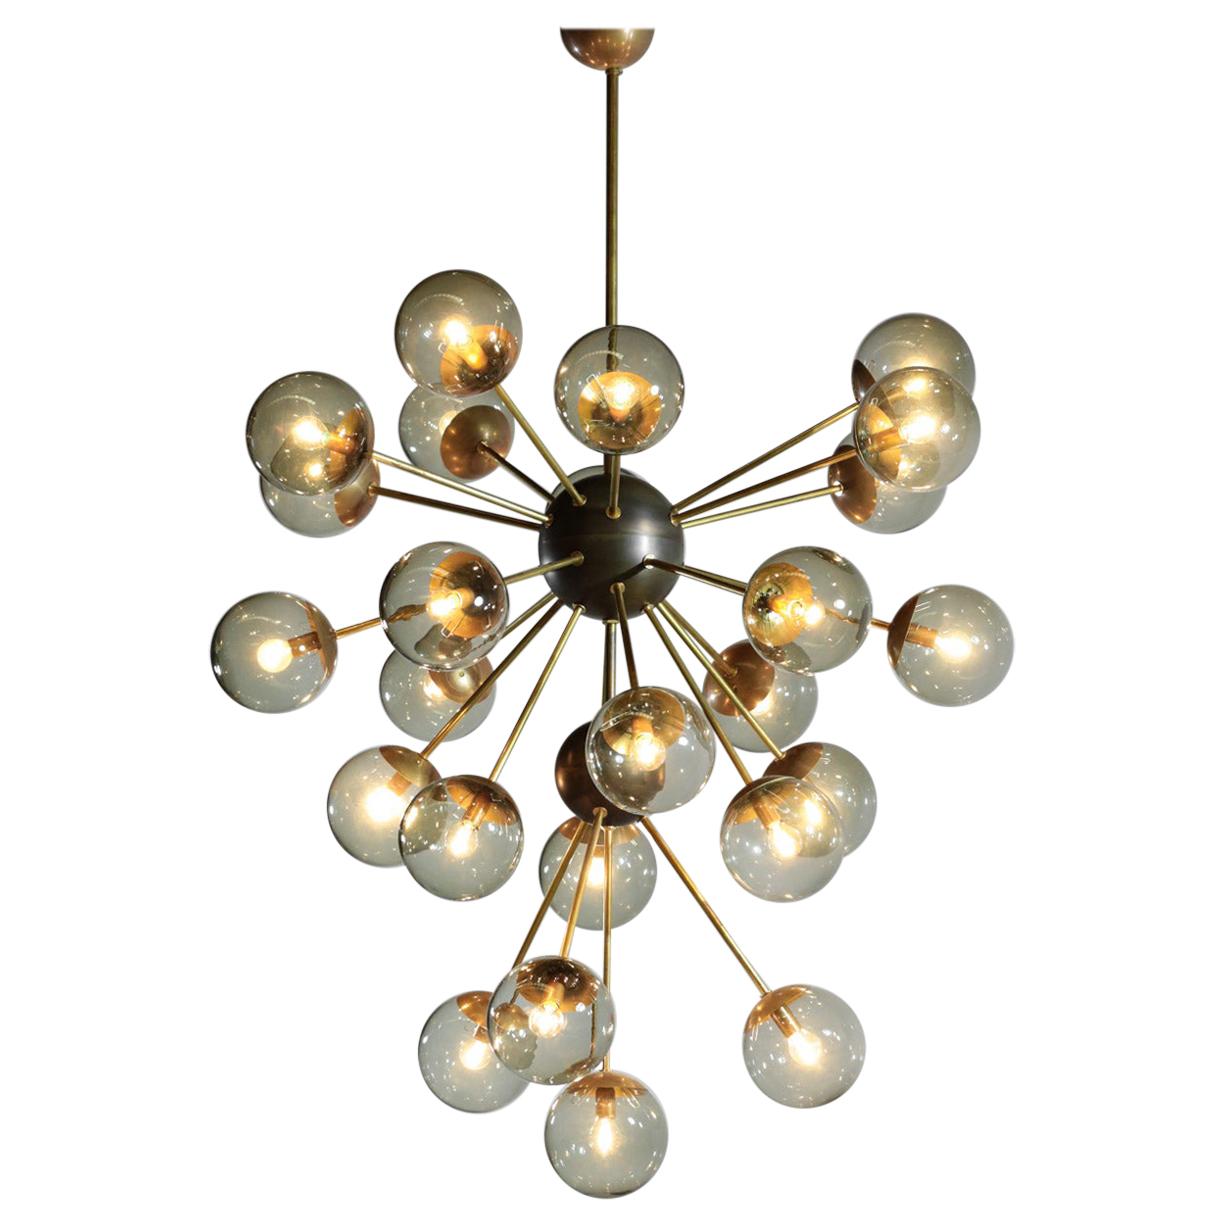 Large Italian Chandelier "Galassia" 25 Smoked Glass Spootnik For Sale